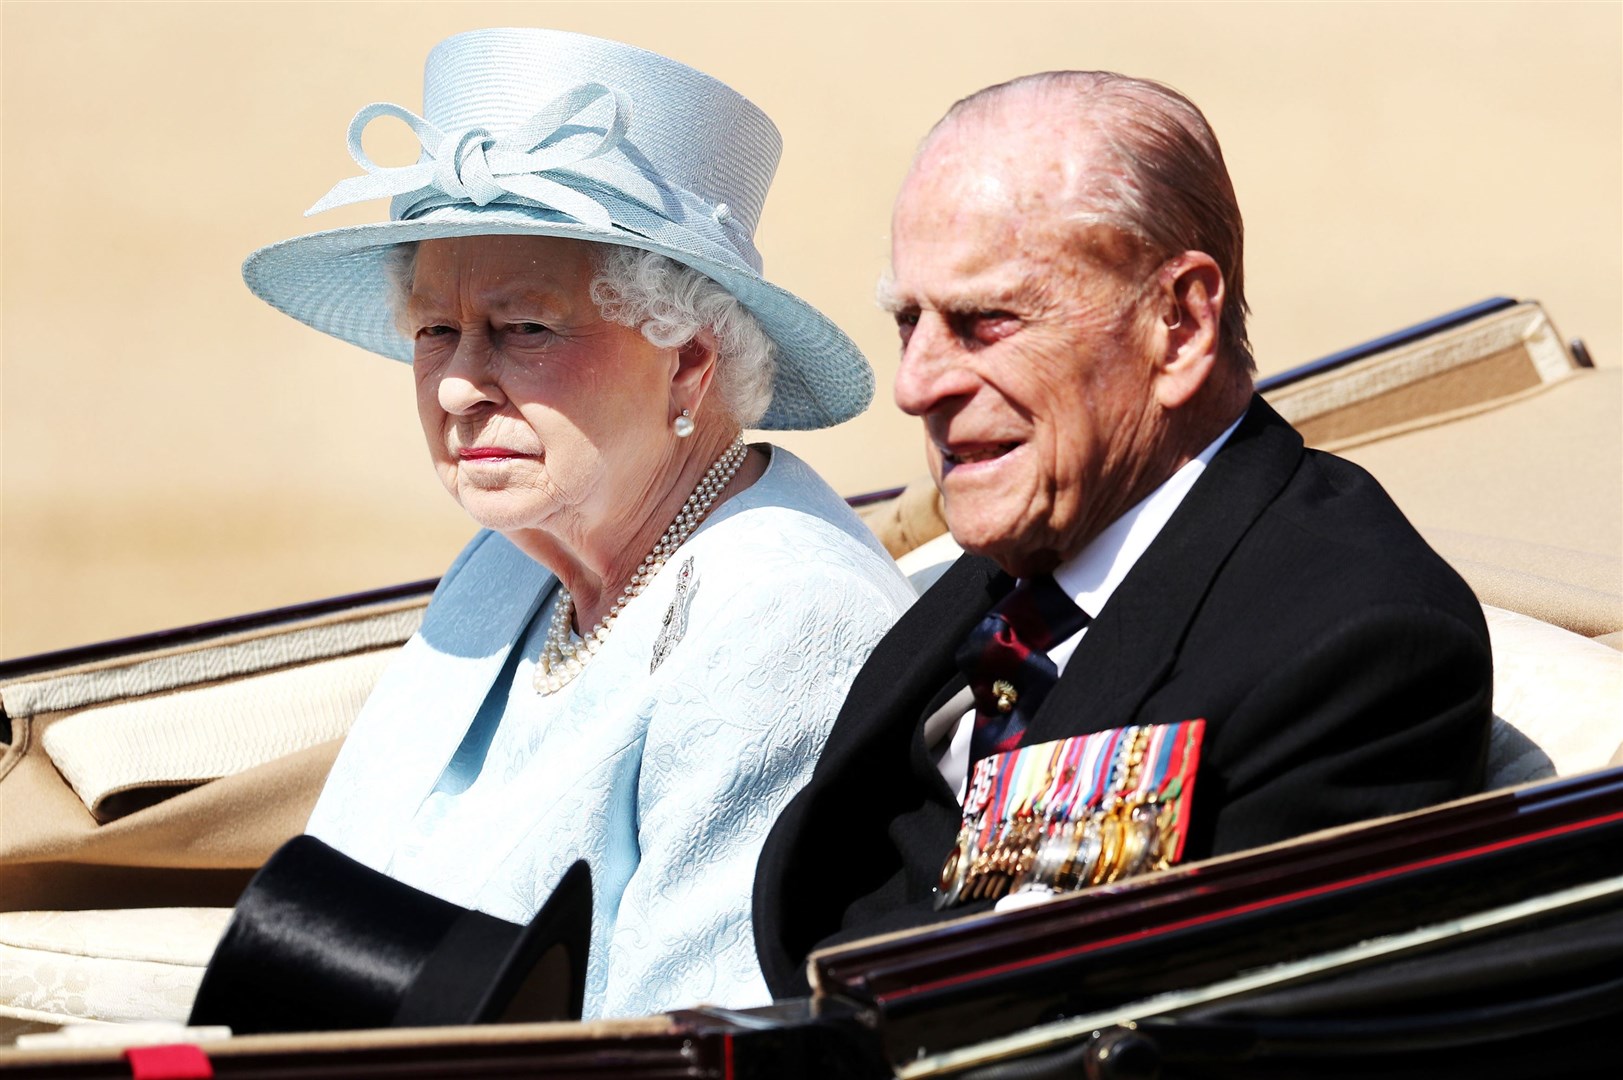 The Queen’s birthday falls a few days after the Duke of Edinburgh’s funeral (Jonathan Brady/PA)